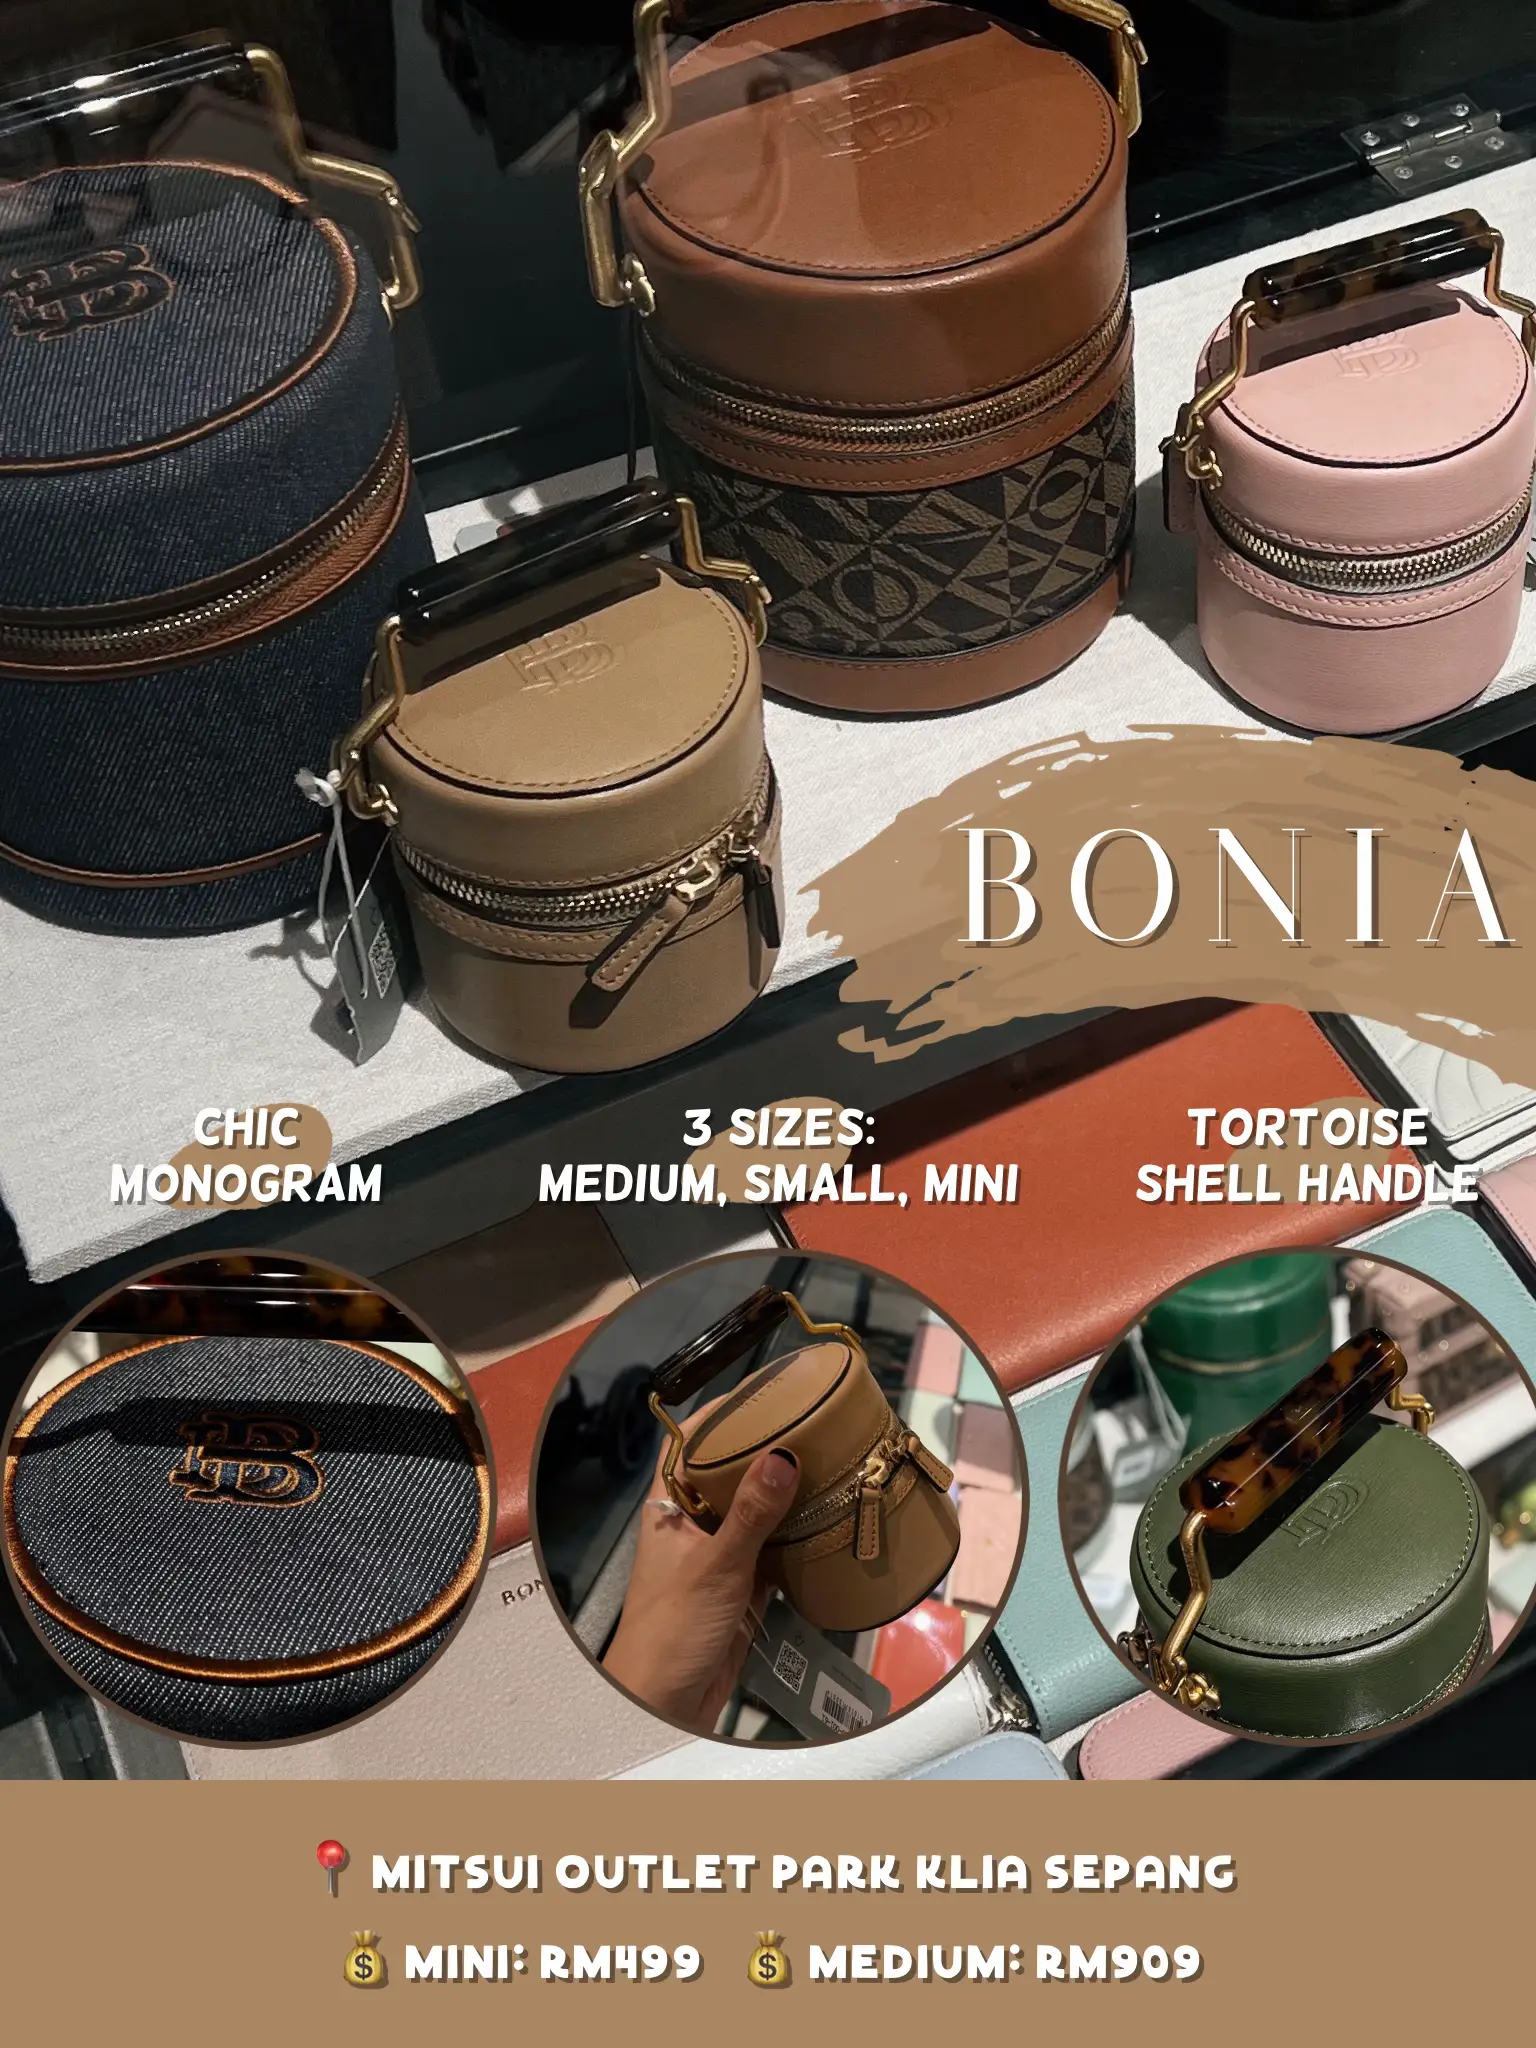 The It Girl Bag by Bonia: Splurge or Save? 🧳, Gallery posted by QILAQLA